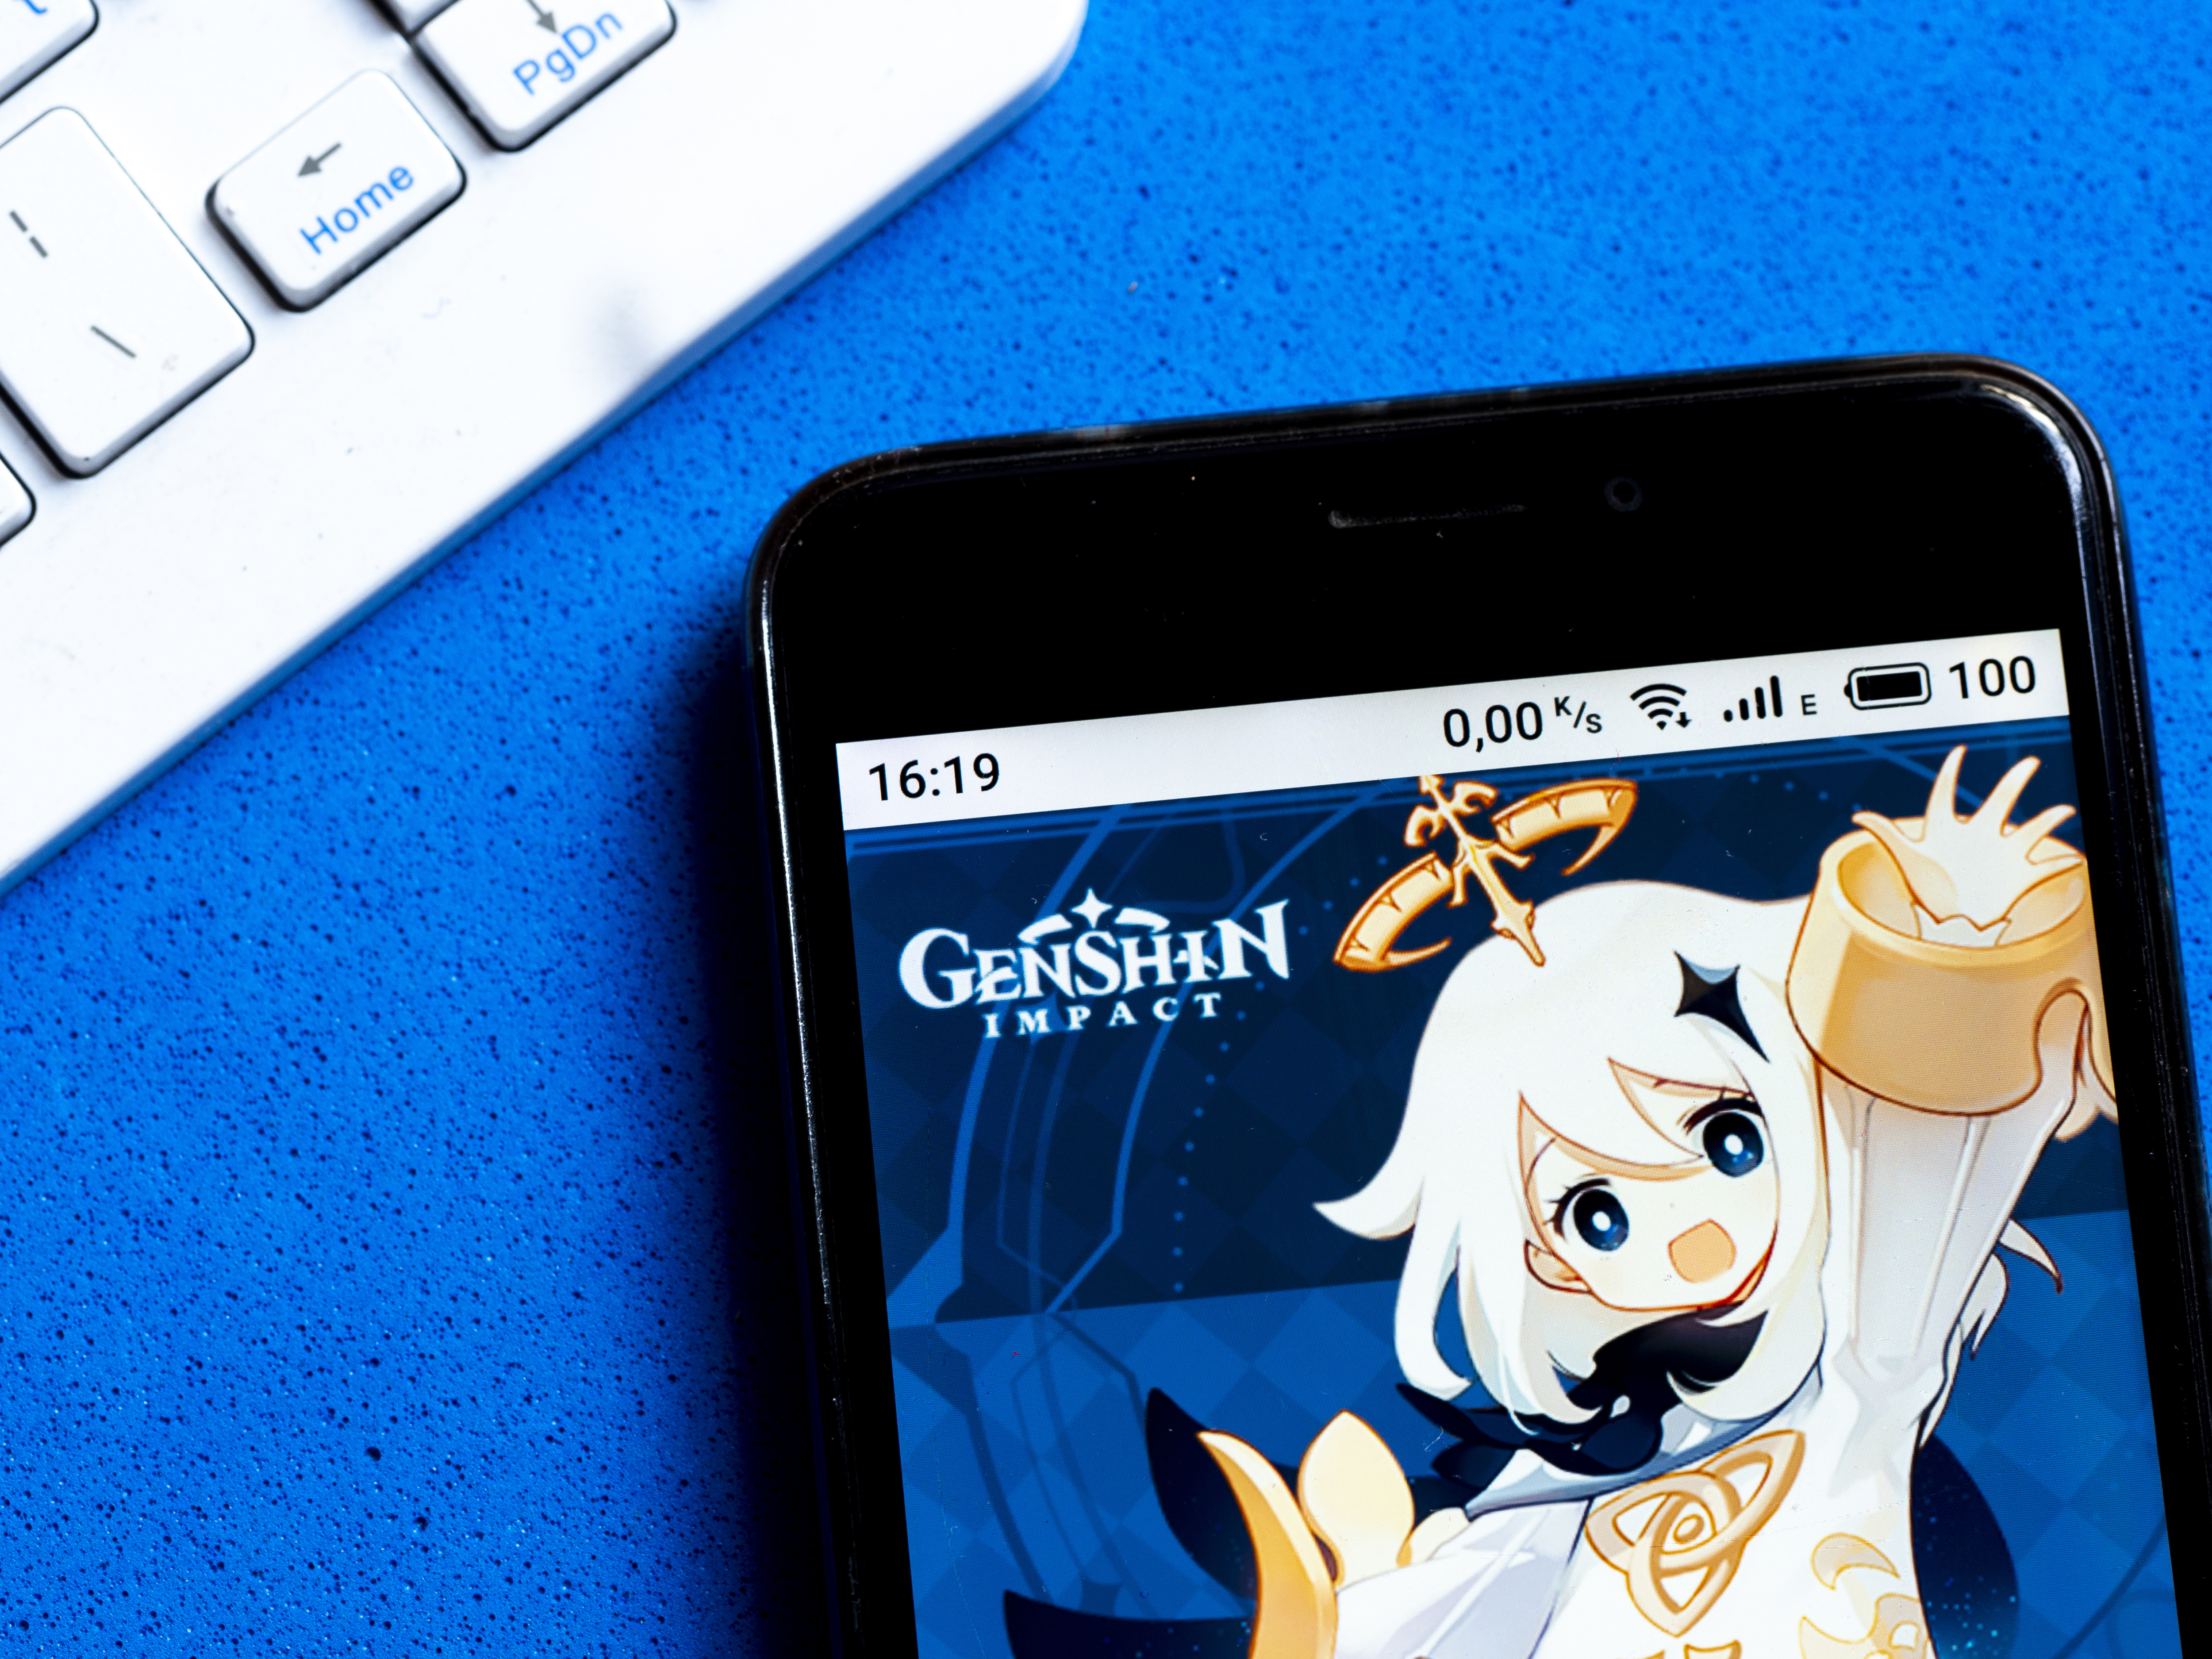 A phone with a backdrop that features an illustration of the Genshin Impact app by miHoYo